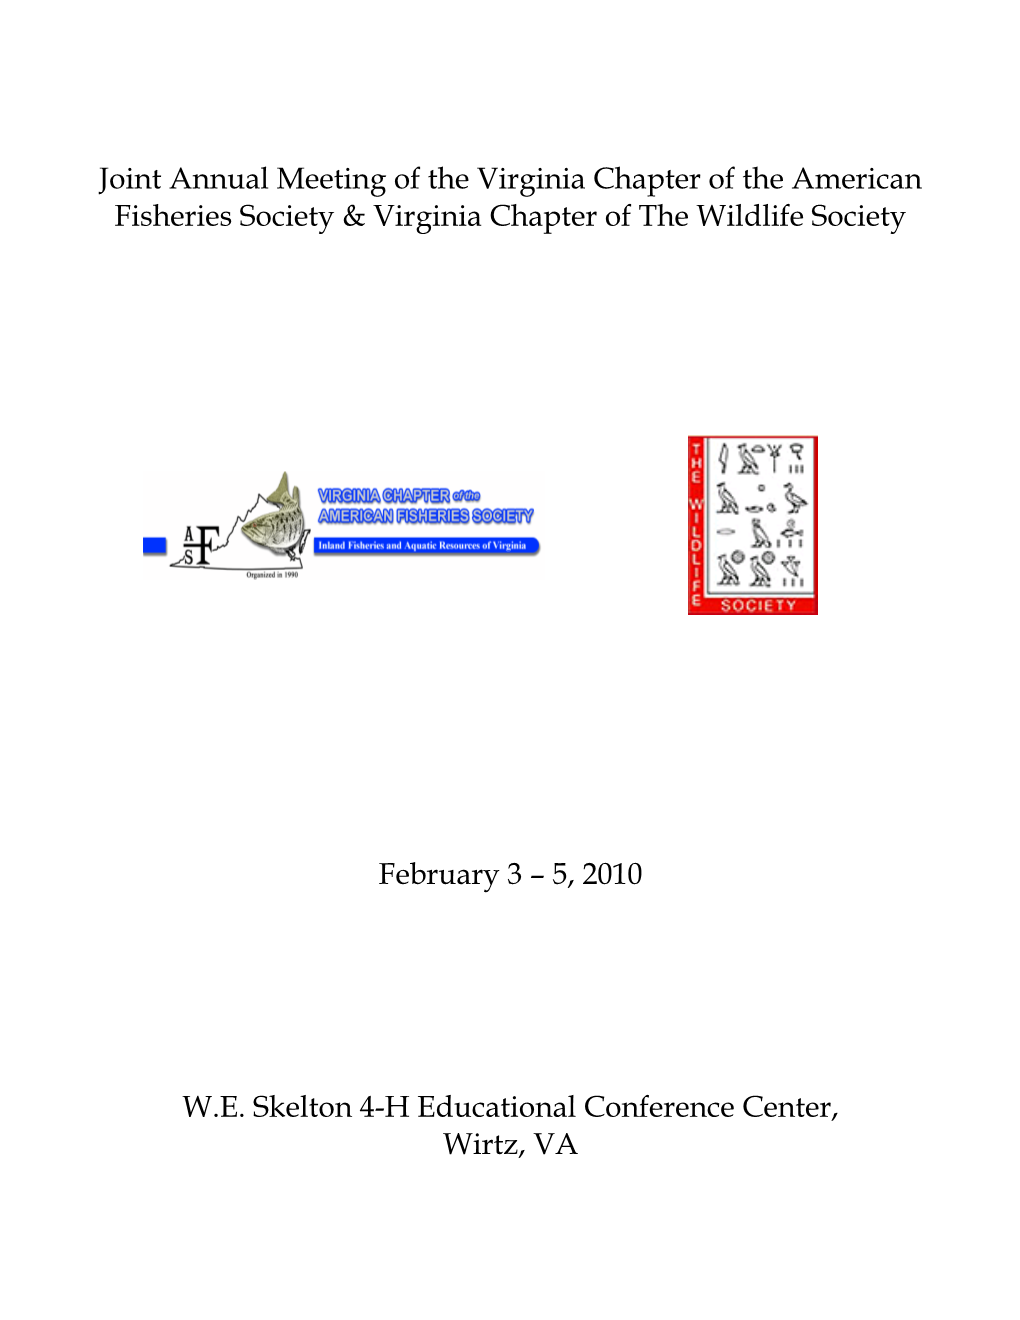 Joint Annual Meeting of the Virginia Chapter of the American Fisheries Society & Virginia Chapter of the Wildlife Society